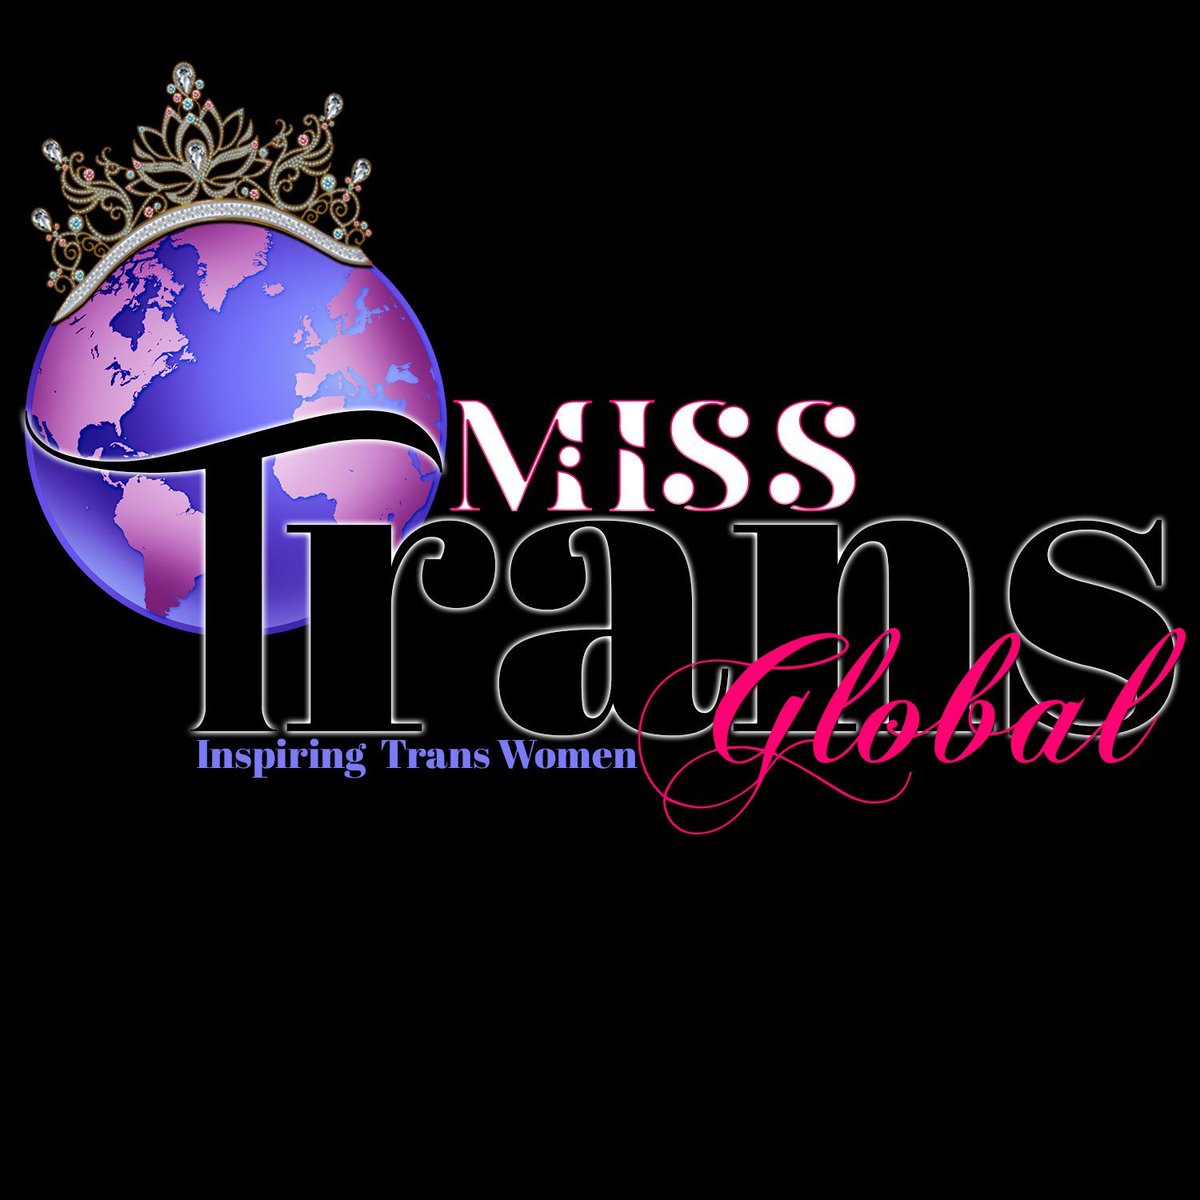 Today we want to shine a spotlight on @MissTransGlobal An inclusive international pageant that showcases the intelligence & creativity of trans women globally. #blackhistorymonth misstransglobal.com